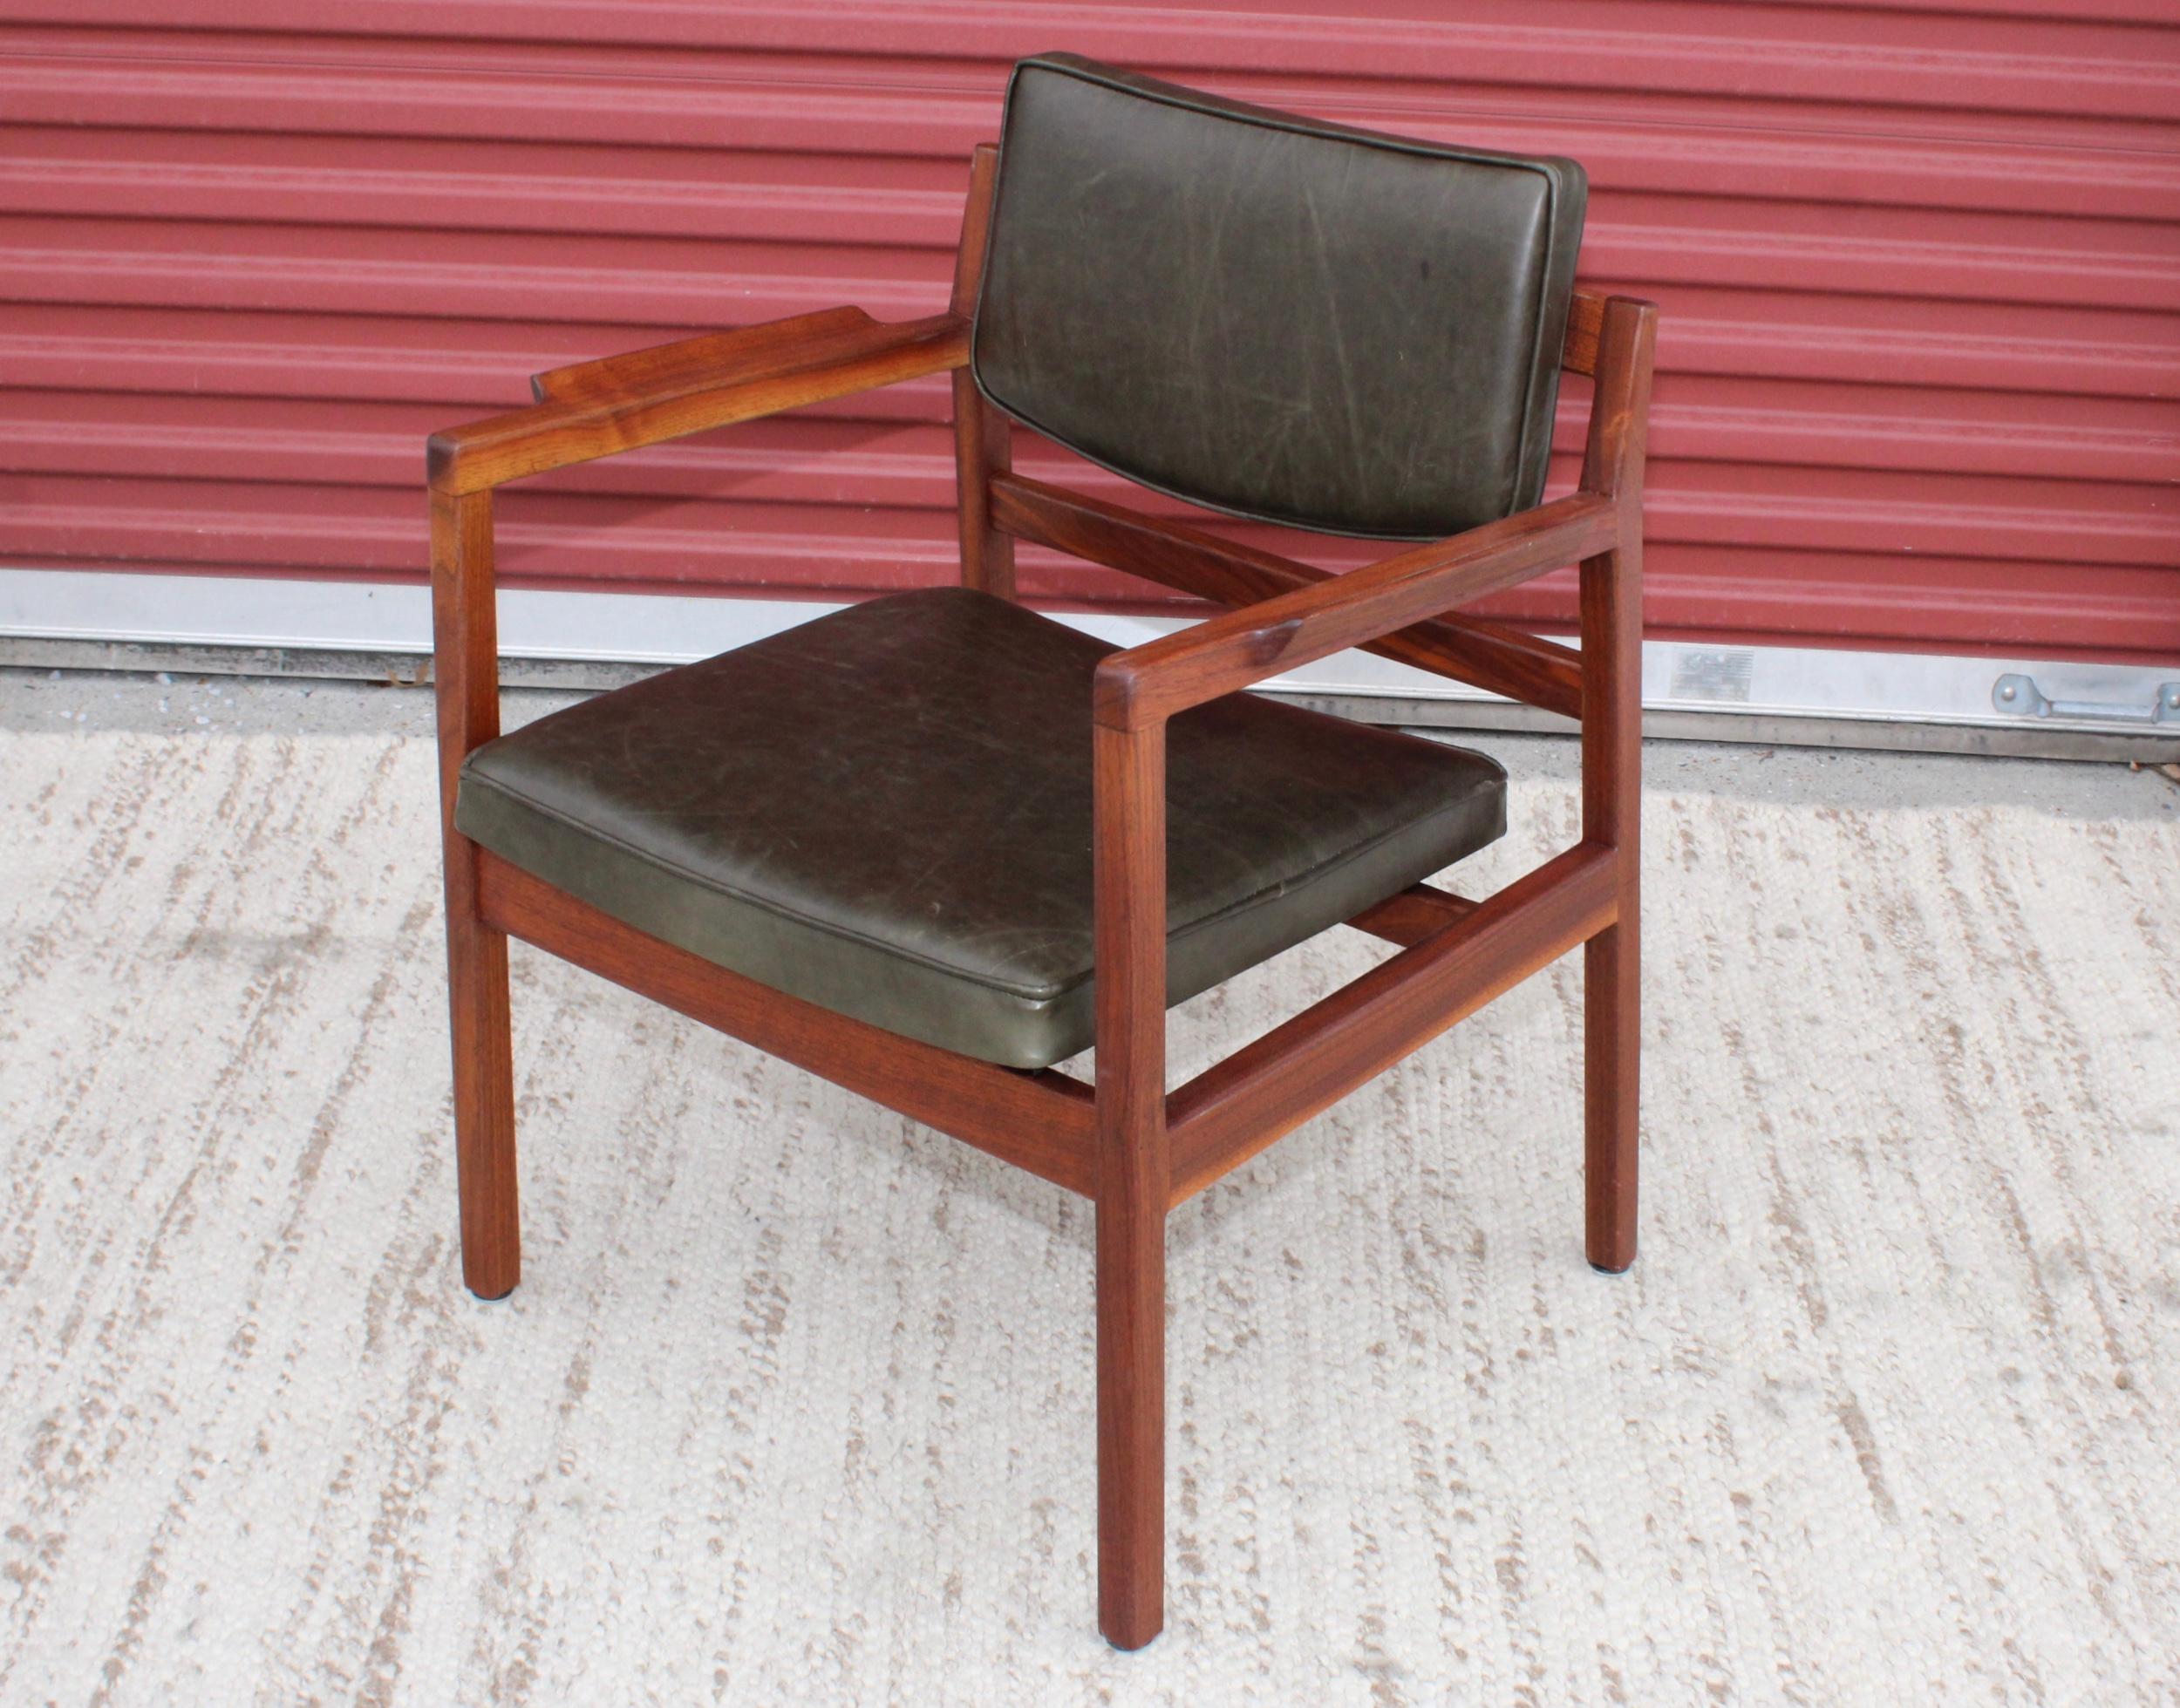 Stunning 1960s Mid-Century Modern walnut desk chair designed by Jens Risom, lightly restored with distressed leather upholstery.